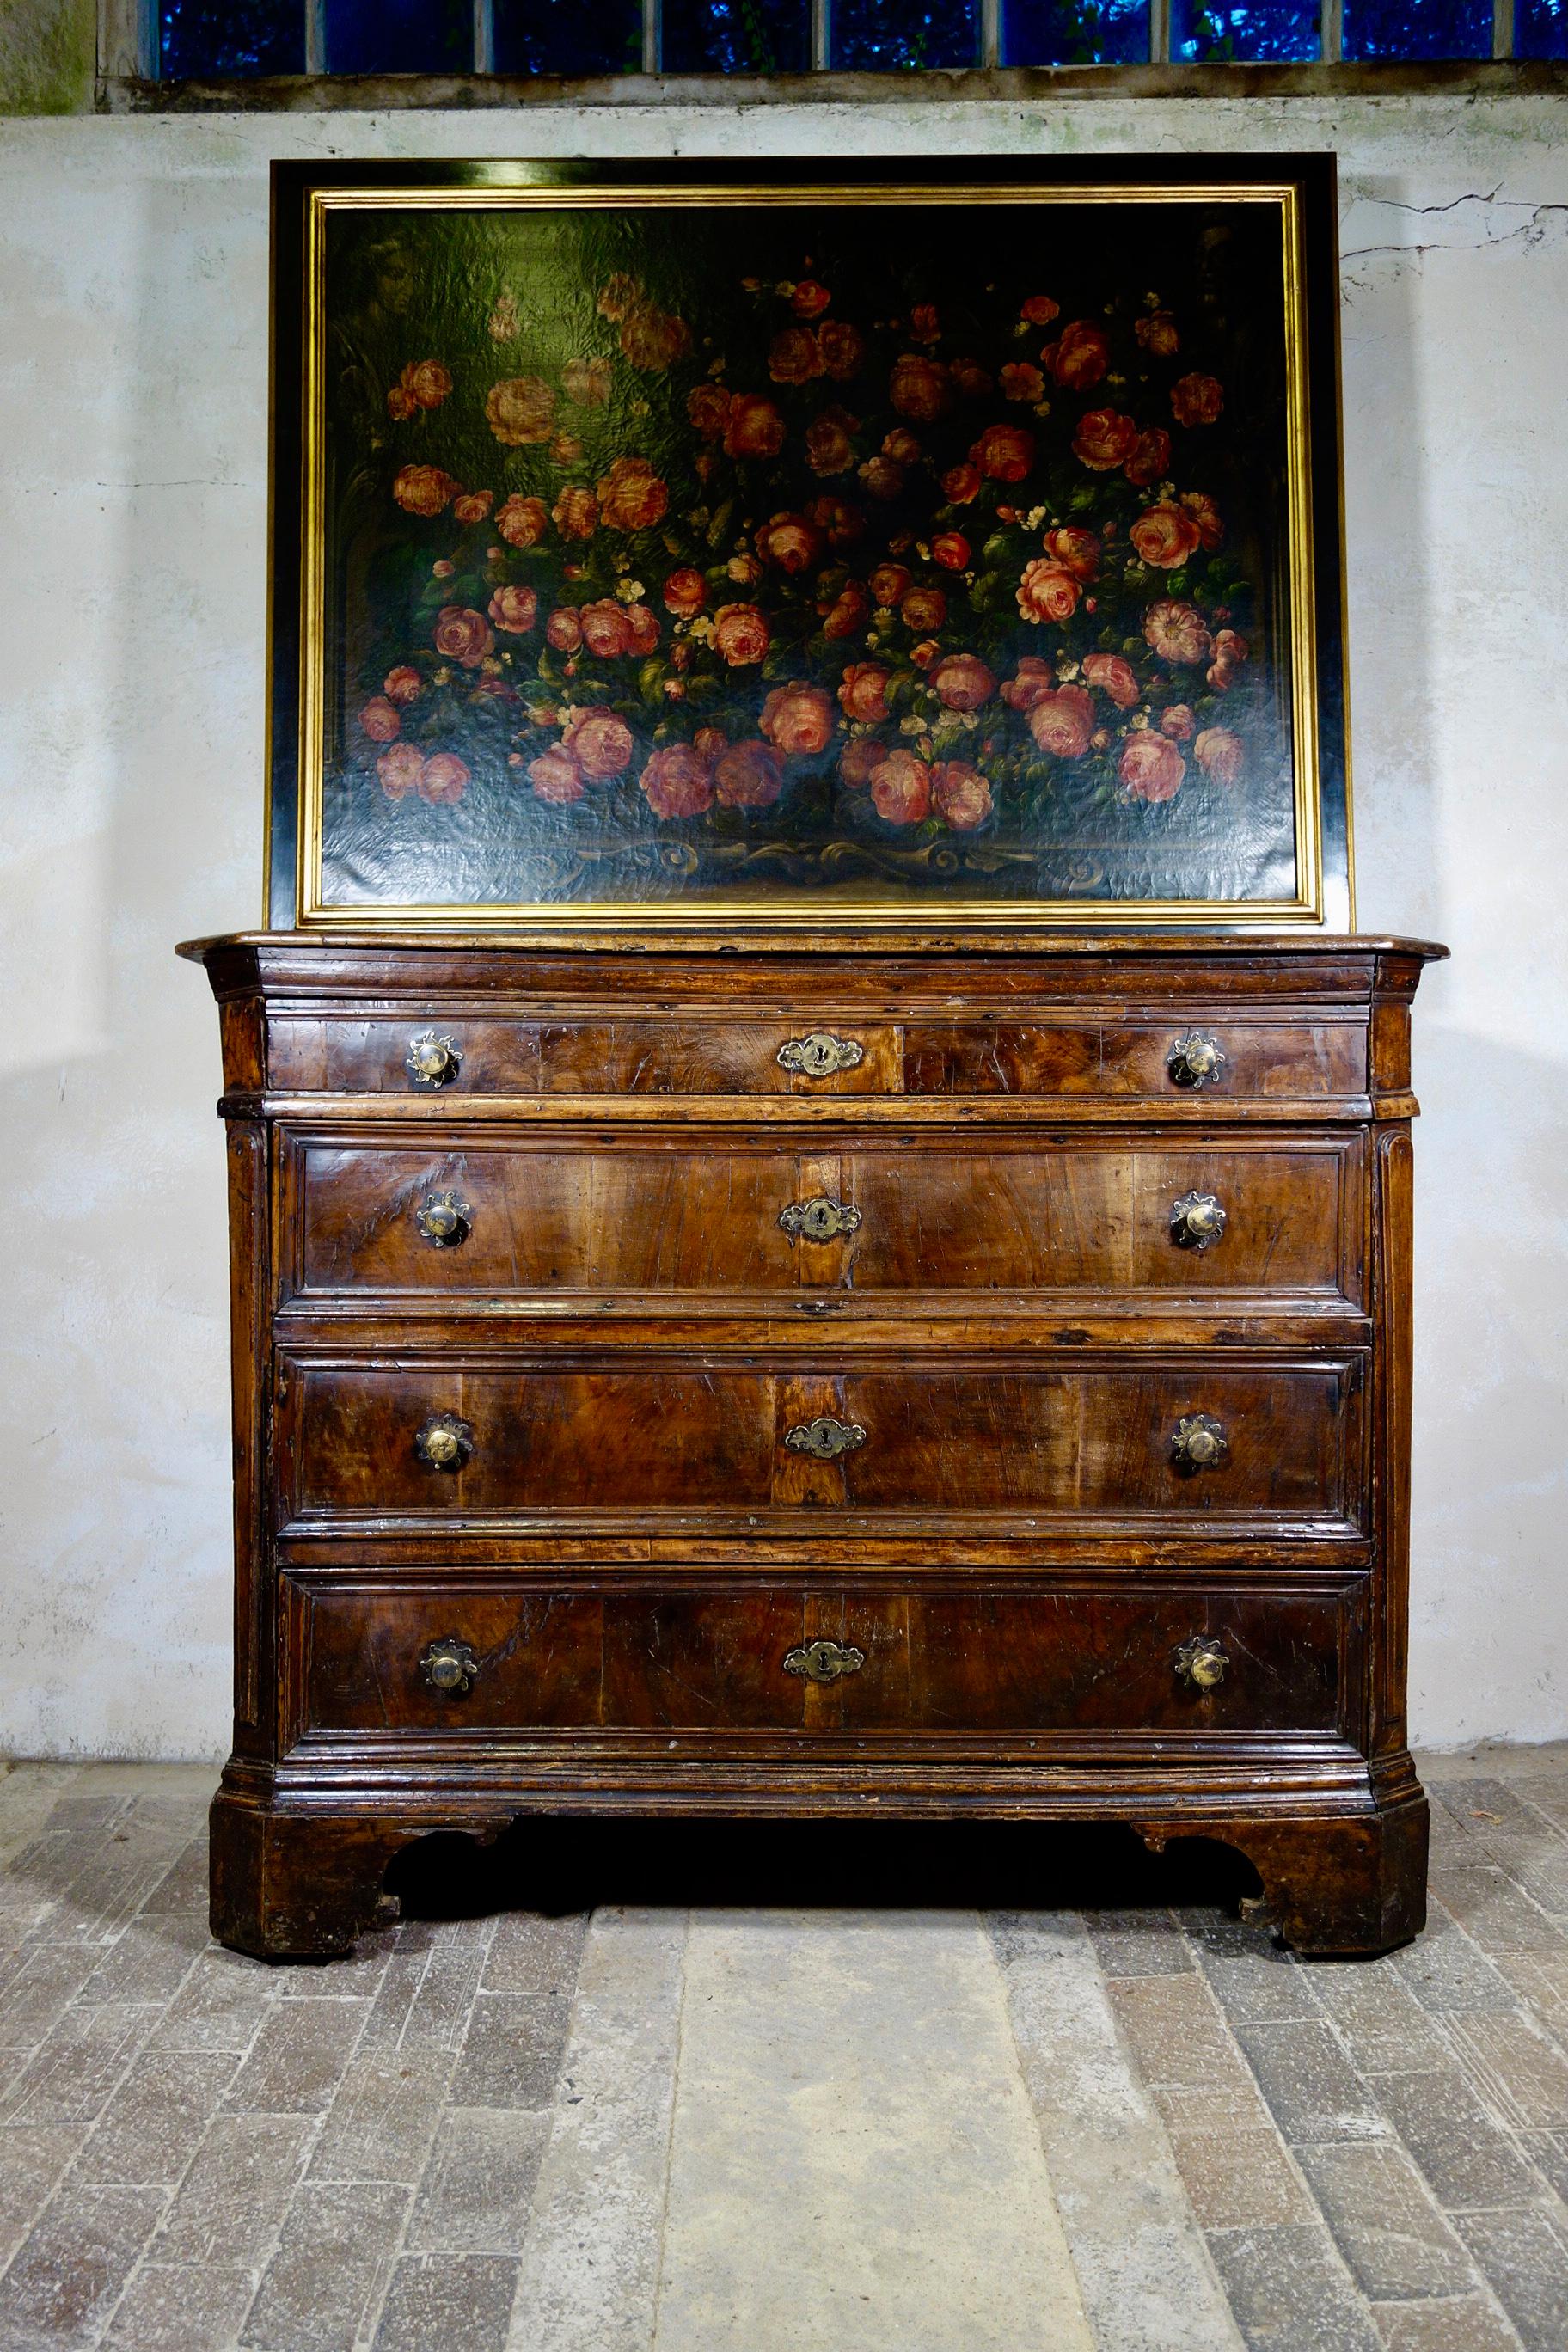 A Huge 17th Century North Italian Walnut Commode - Chest of Drawers - Dresser For Sale 8